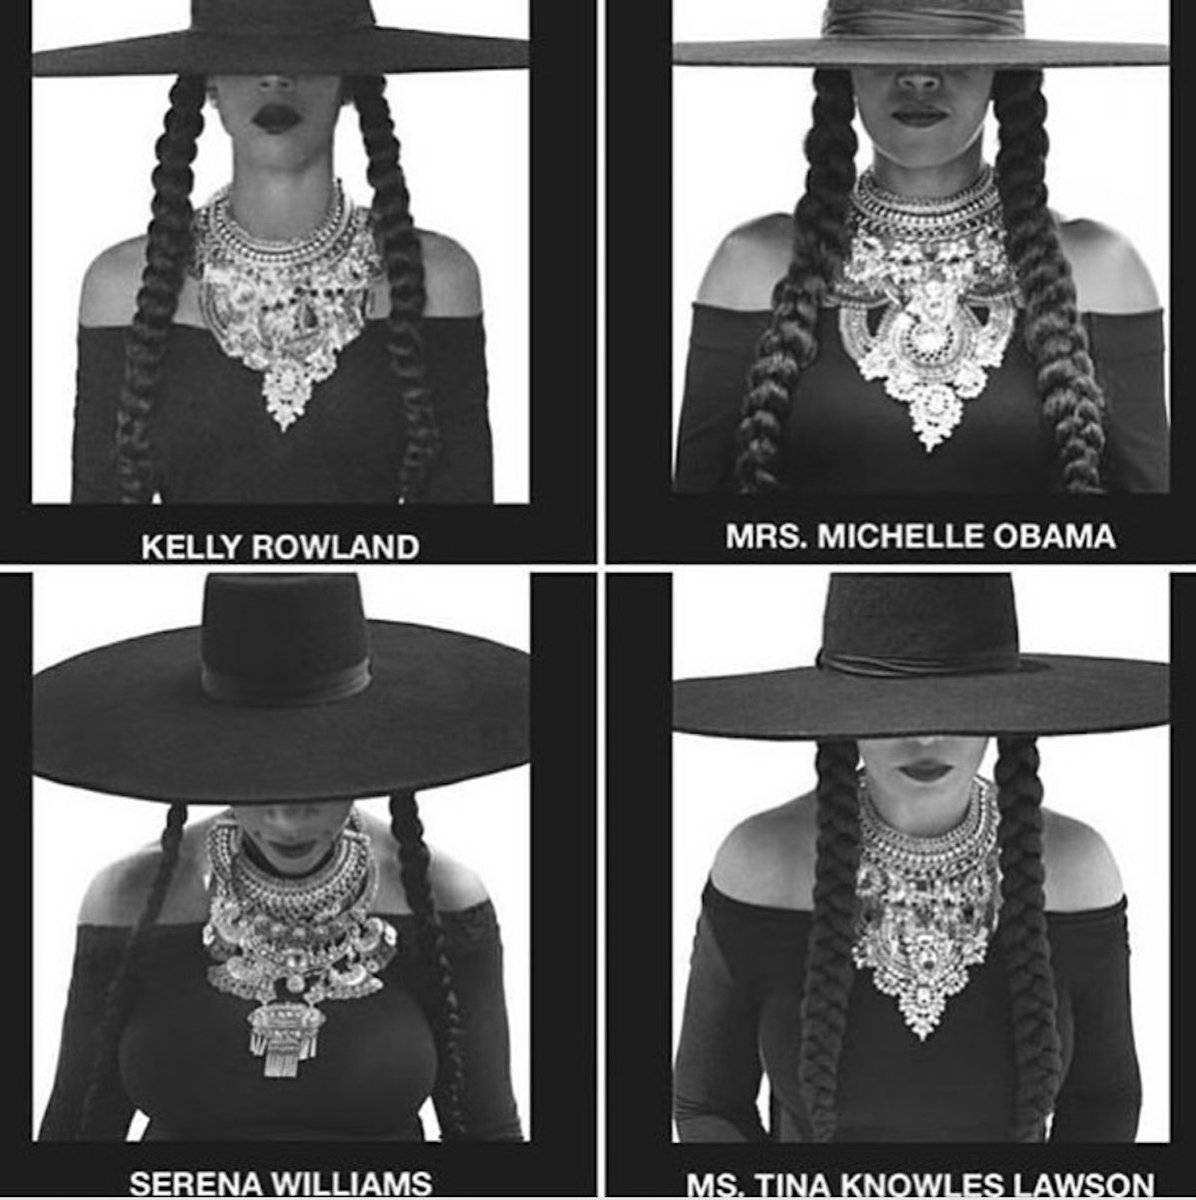 And of course the iconic Formation look, worn by legends such as Serena Williams, Michelle Obama and Blue Ivy. It even inspired a Marvel comic cover, with the illustrator saying that Beyoncé is the perfect symbol of "representation, feminism and fighting for what’s right".